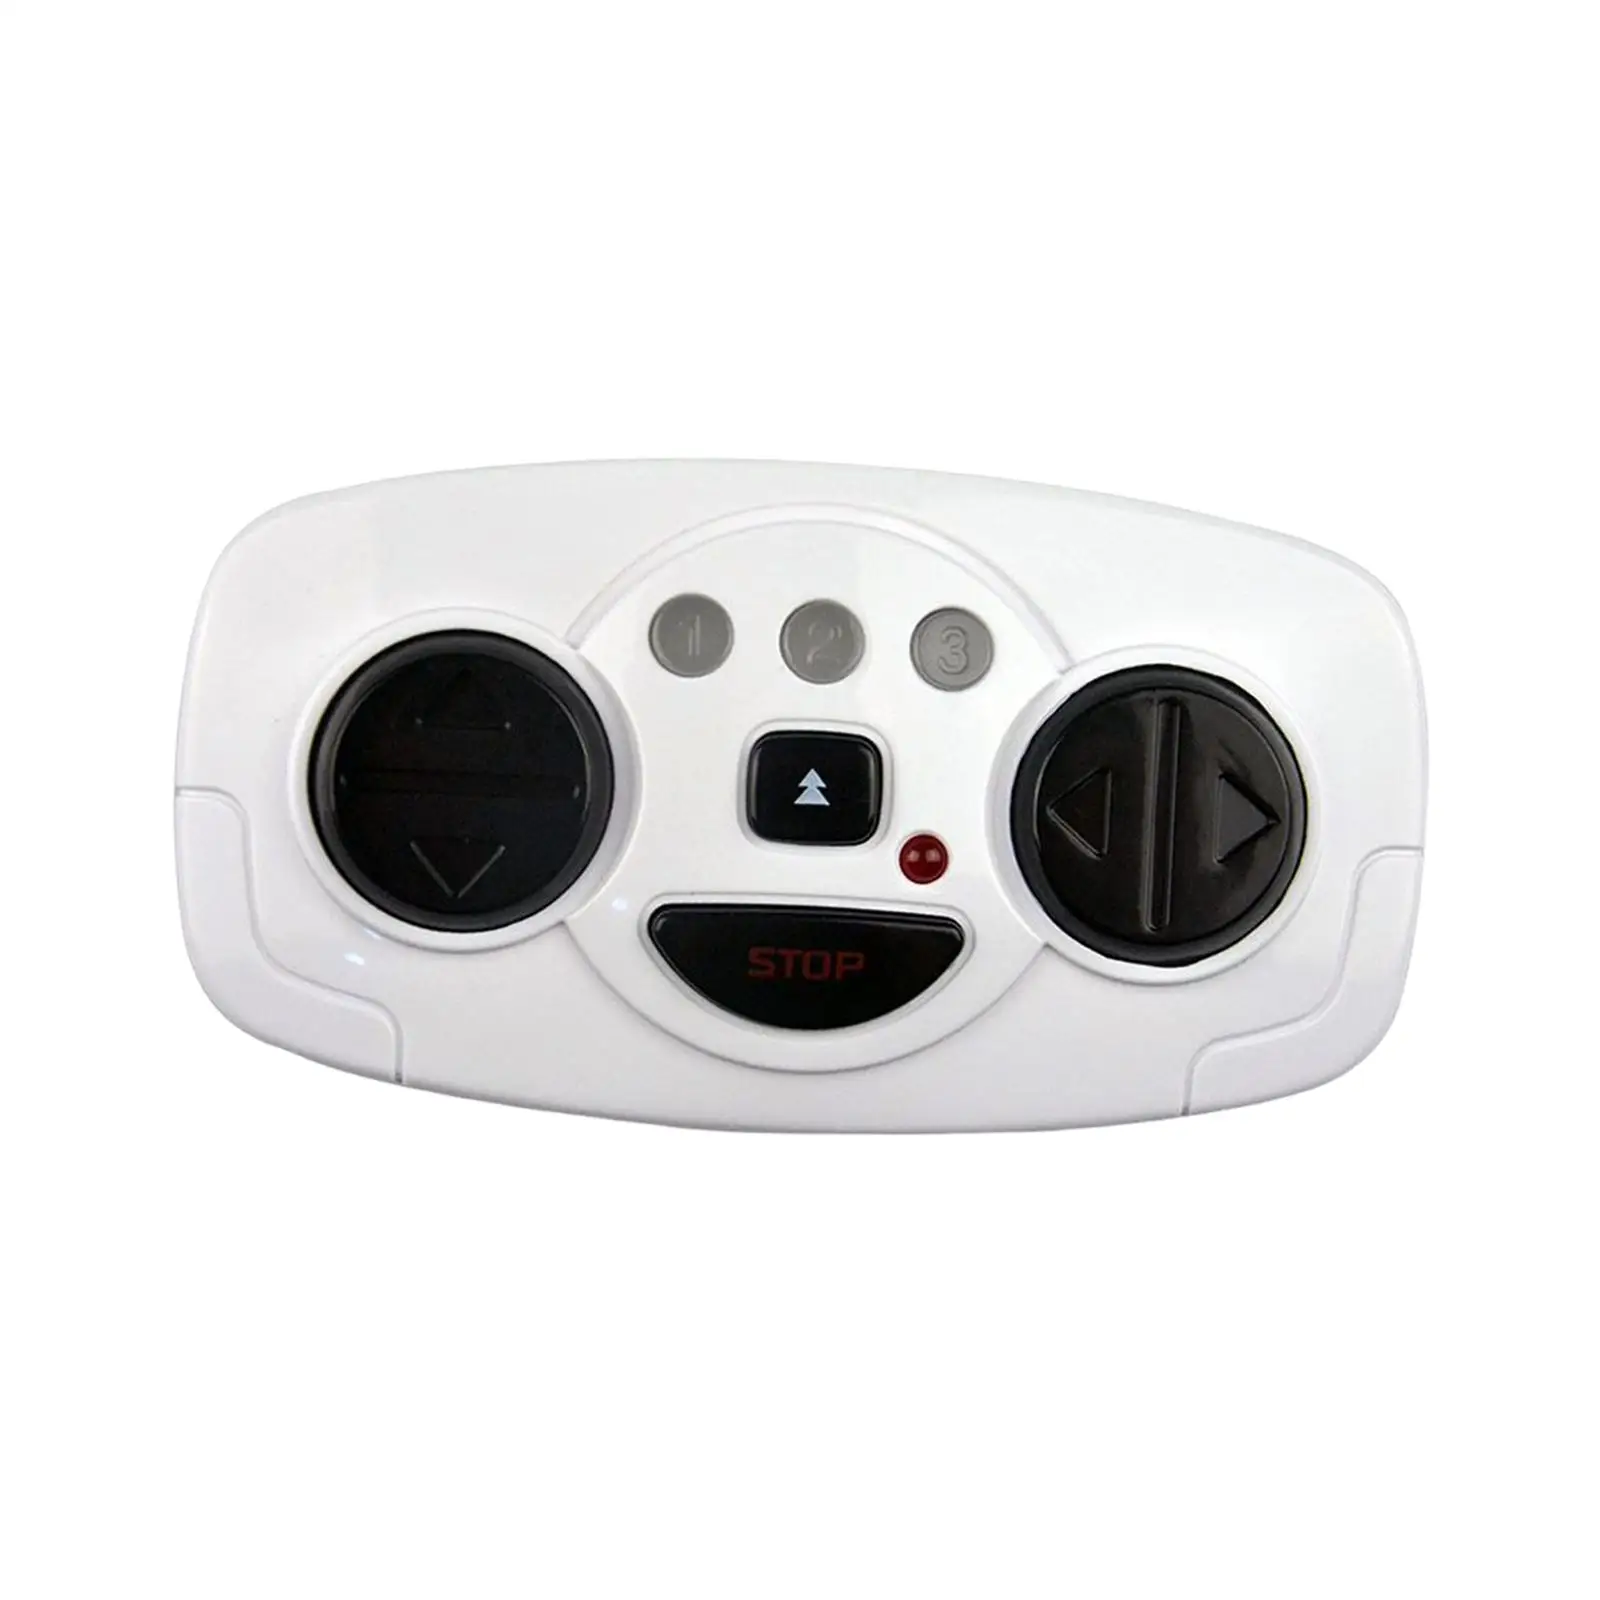 Replacement Remote Controller Repair Parts Accessories for Kids Children